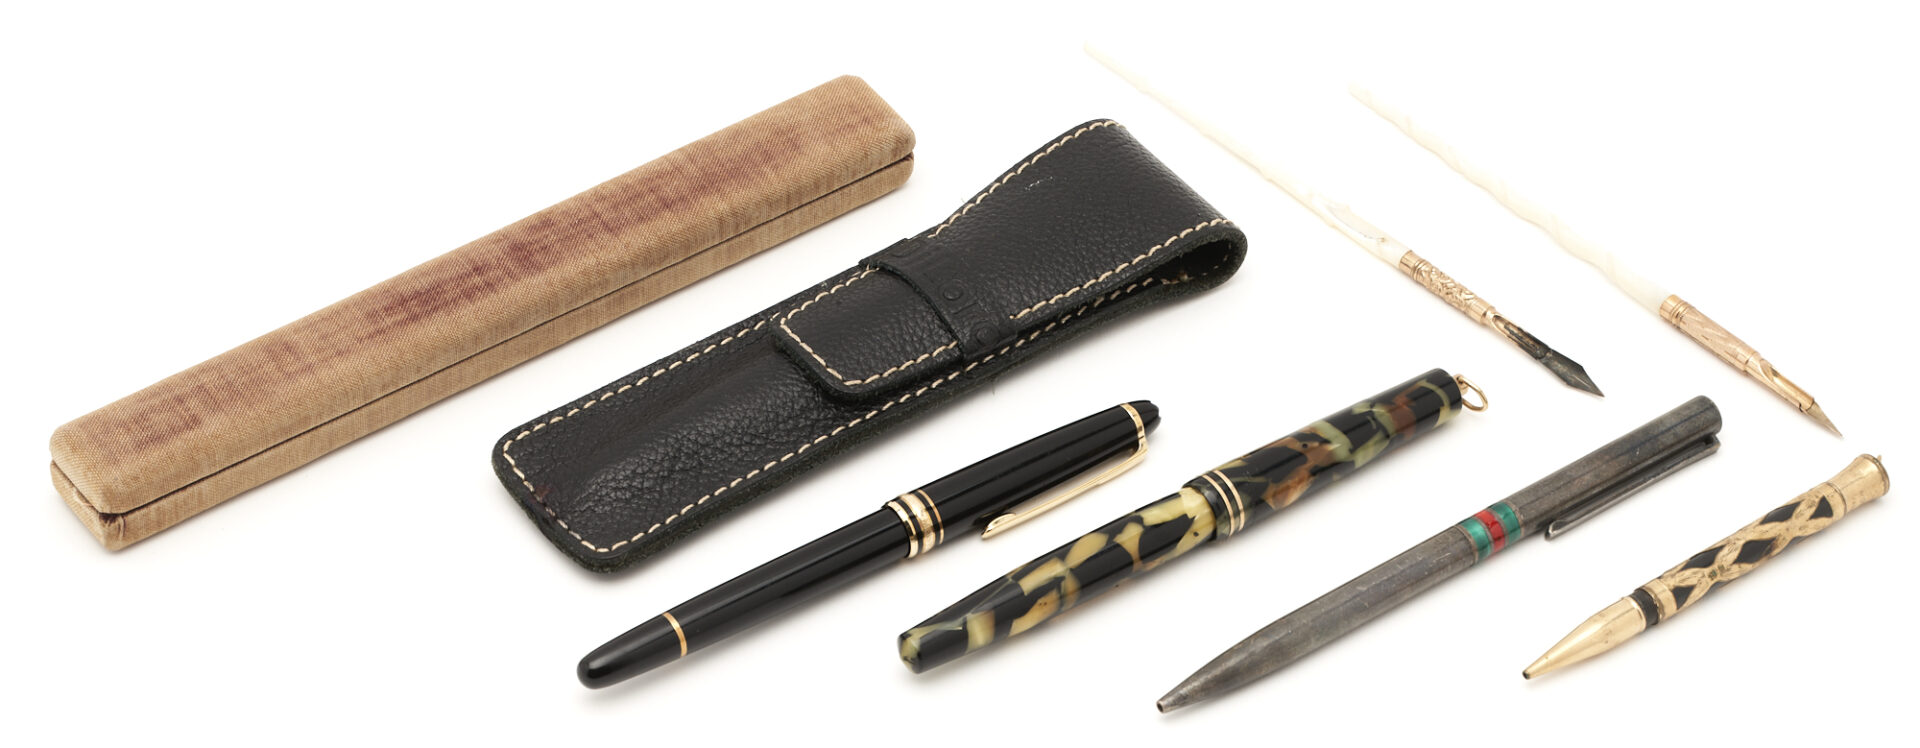 Lot 765: 6 Pens incl. Montblanc, Gucci, Wahl, 2 Mother of Pearl